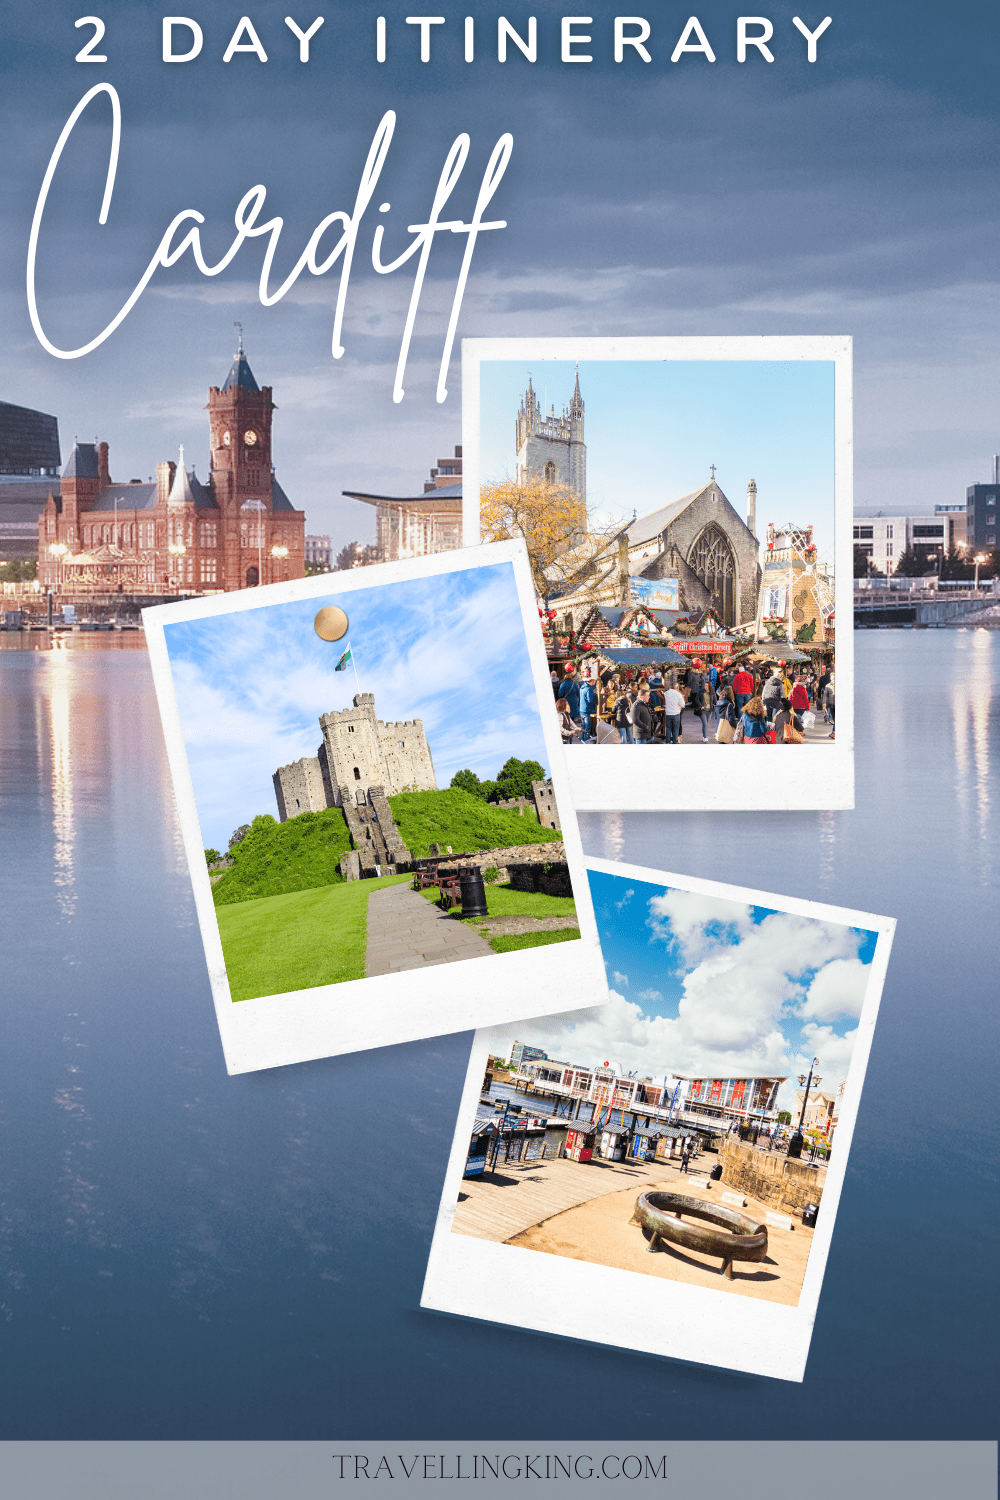 48 Hours in Cardiff - 2 Day itinerary